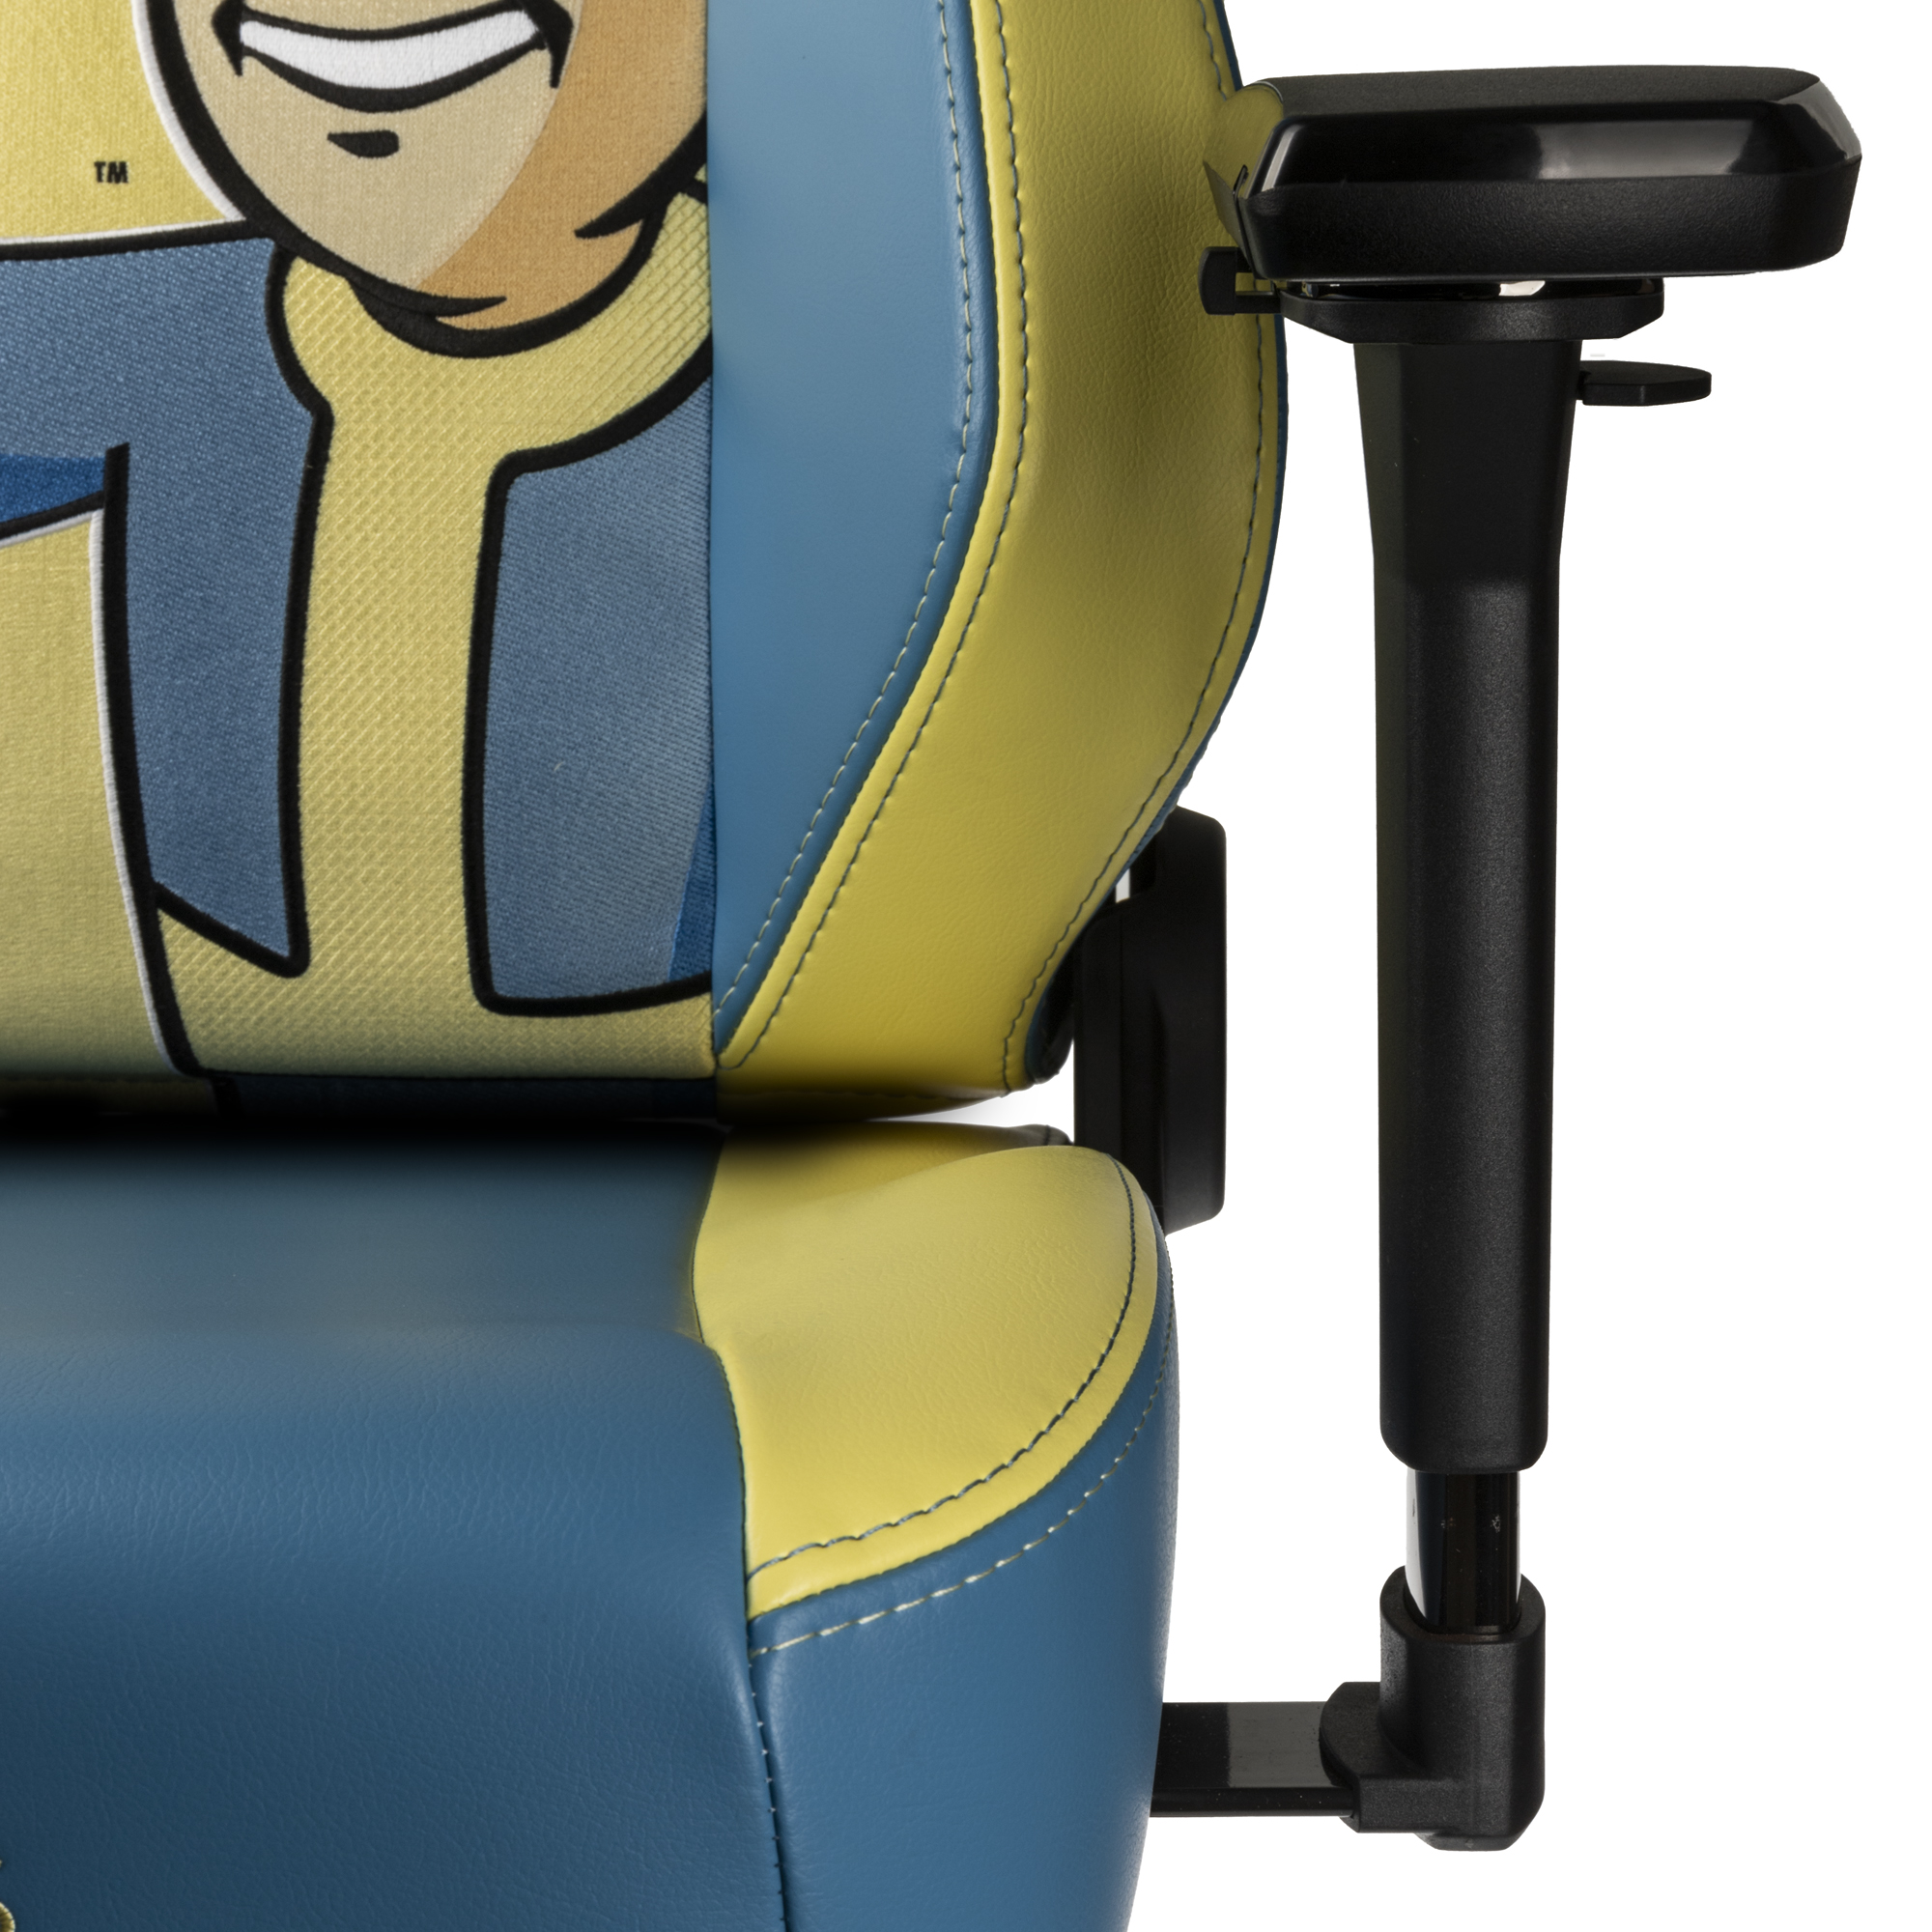 noblchair fallout edition Arm rests